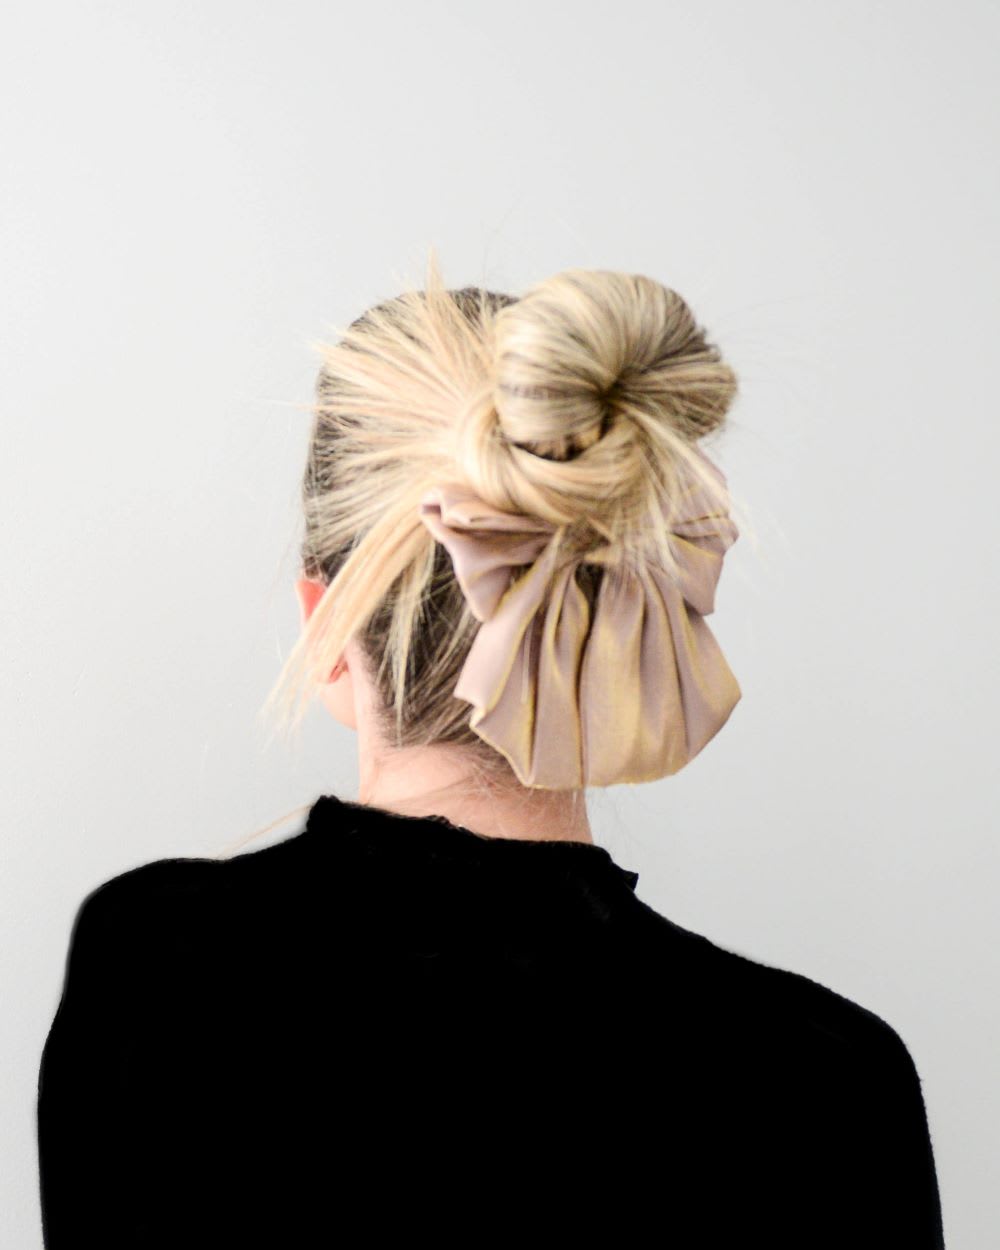 back view of a woman wearing a black top and a messy bun with a bow